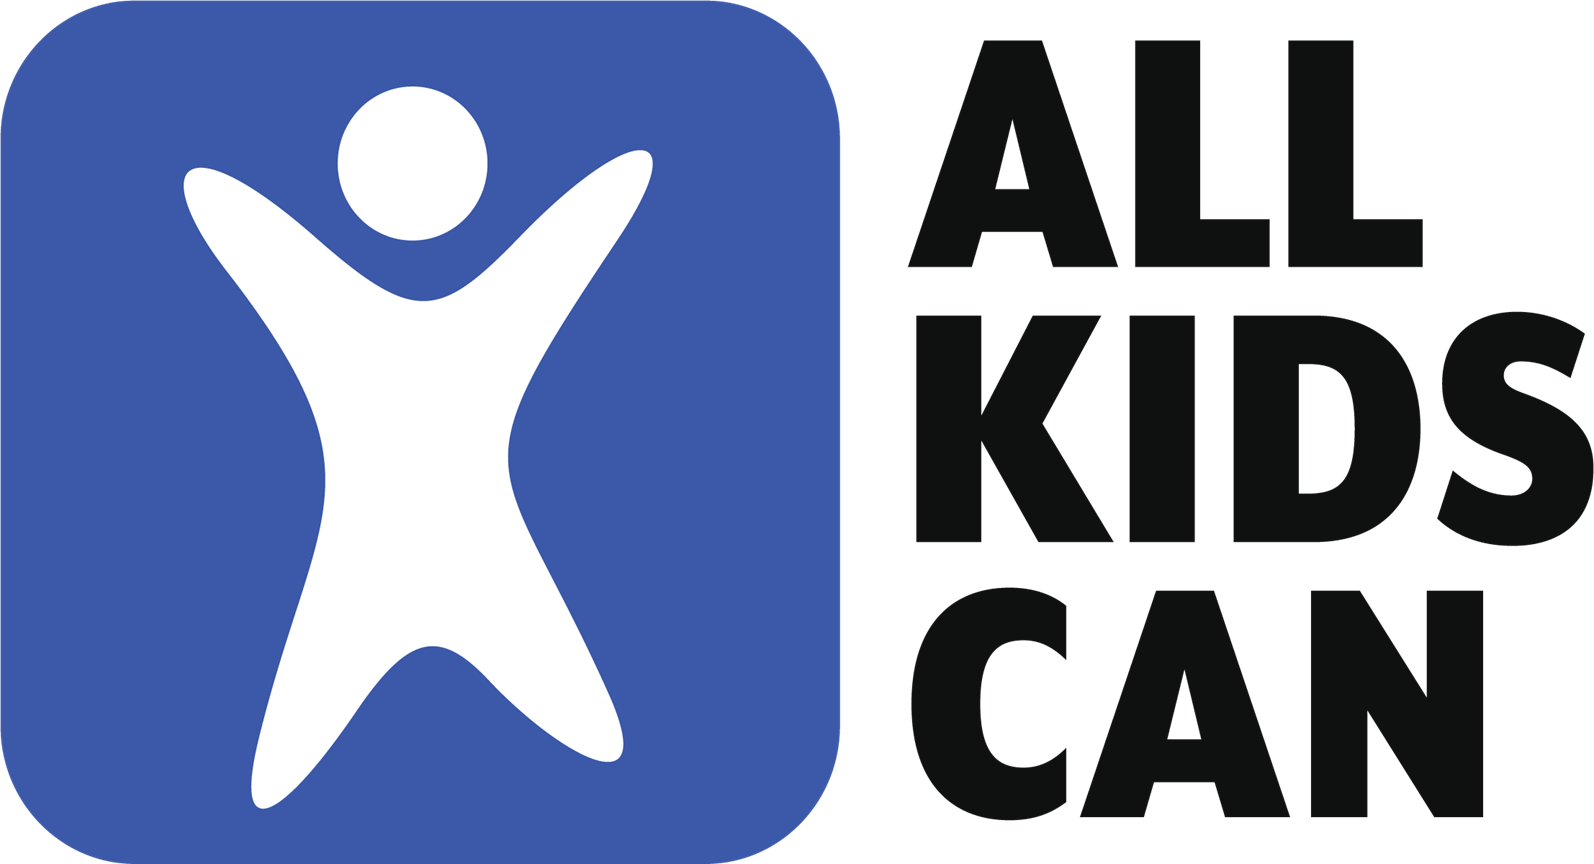 All Kids Can